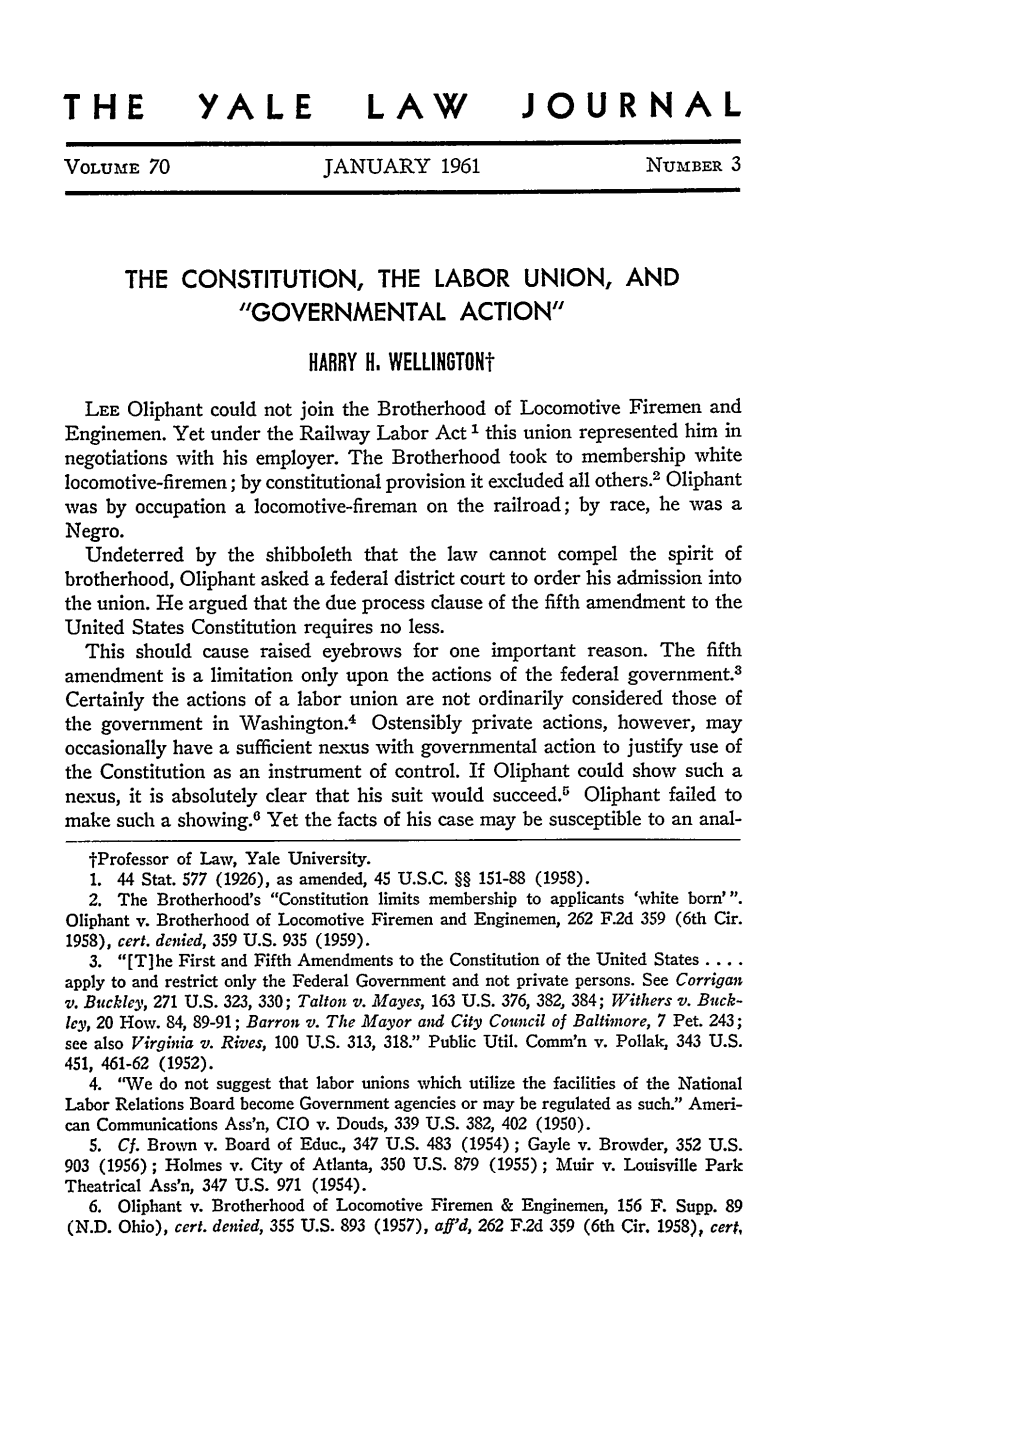 THE CONSTITUTION, the LABOR UNION, and "GOVERNMENTAL ACTION" HARRY H.Wellingtont